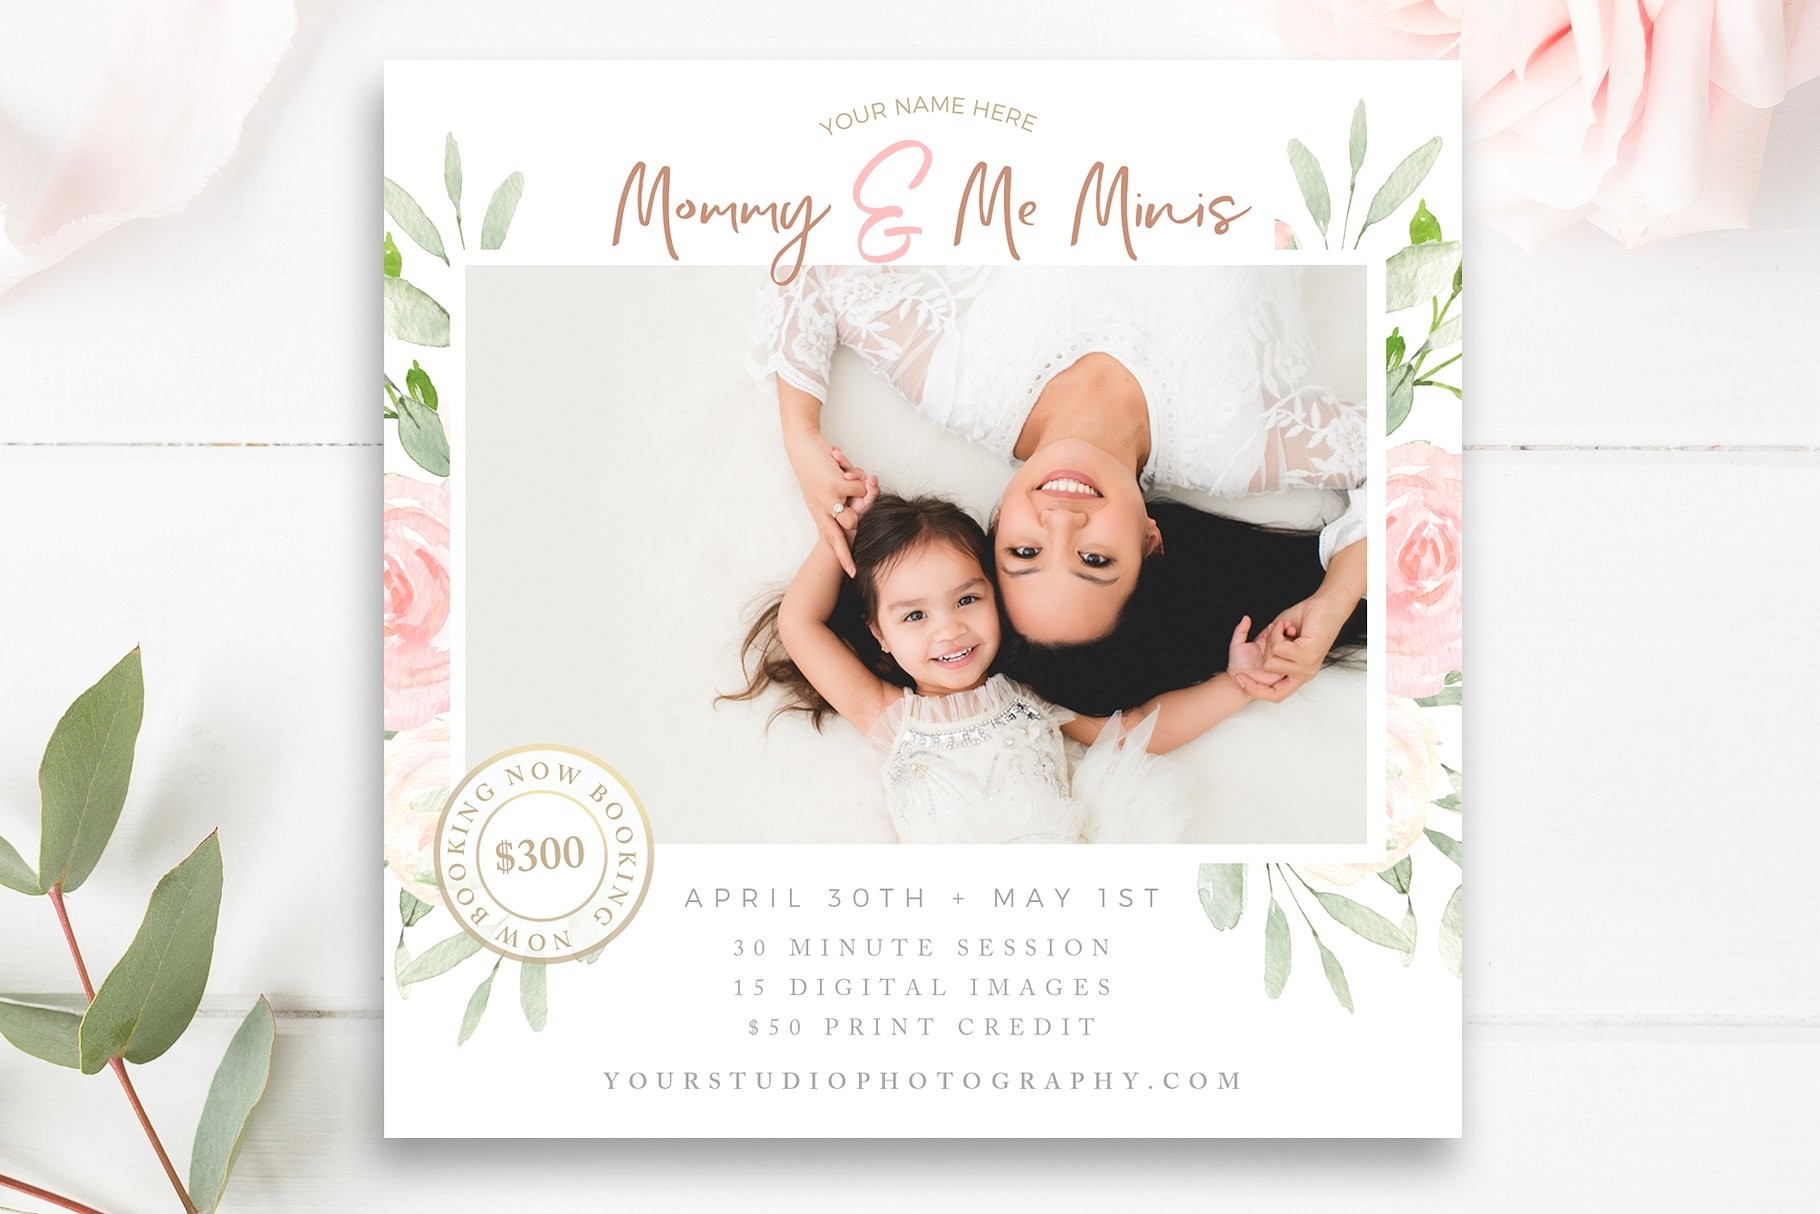 Mommy Me Mini Session Template Flyer Templates Creative Market And